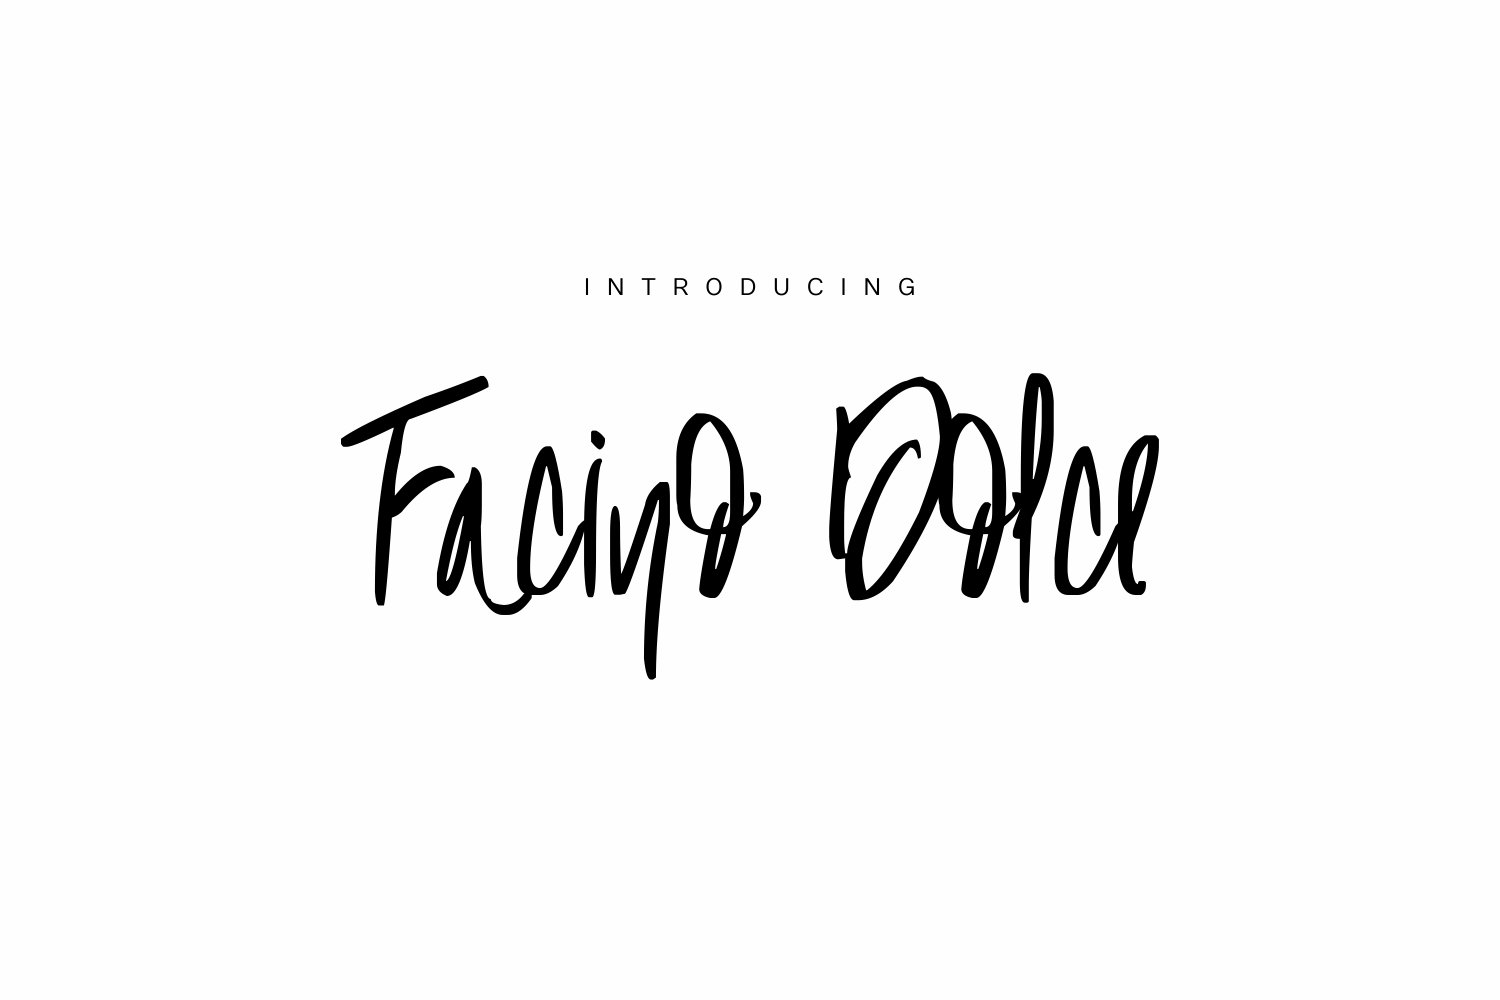 Facino Dolce Font Poster 1